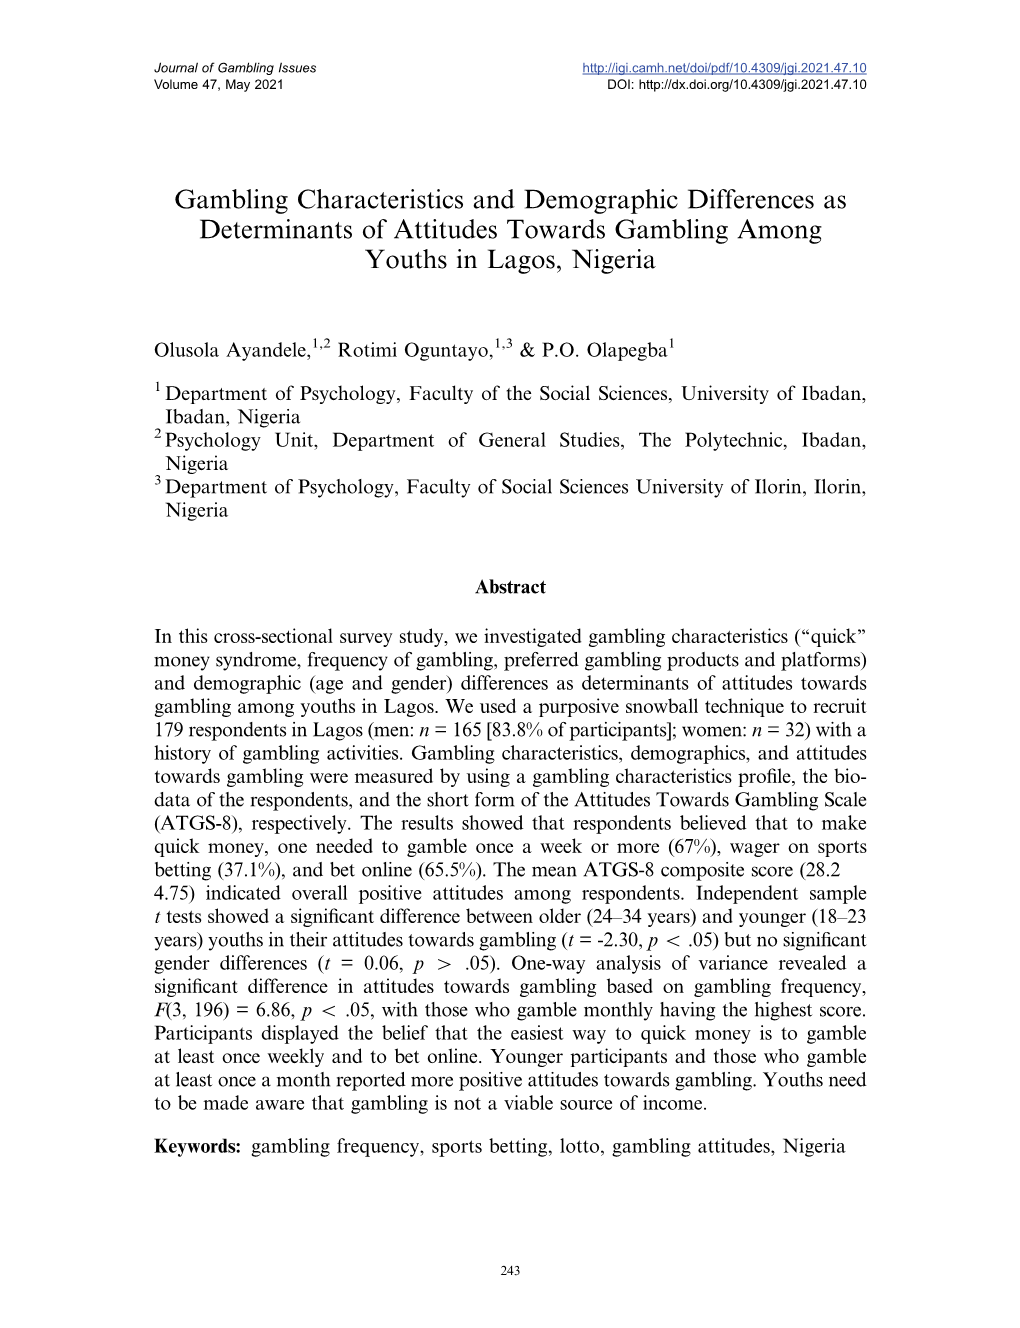 Gambling Characteristics and Demographic Differences As Determinants of Attitudes Towards Gambling Among Youths in Lagos, Nigeria